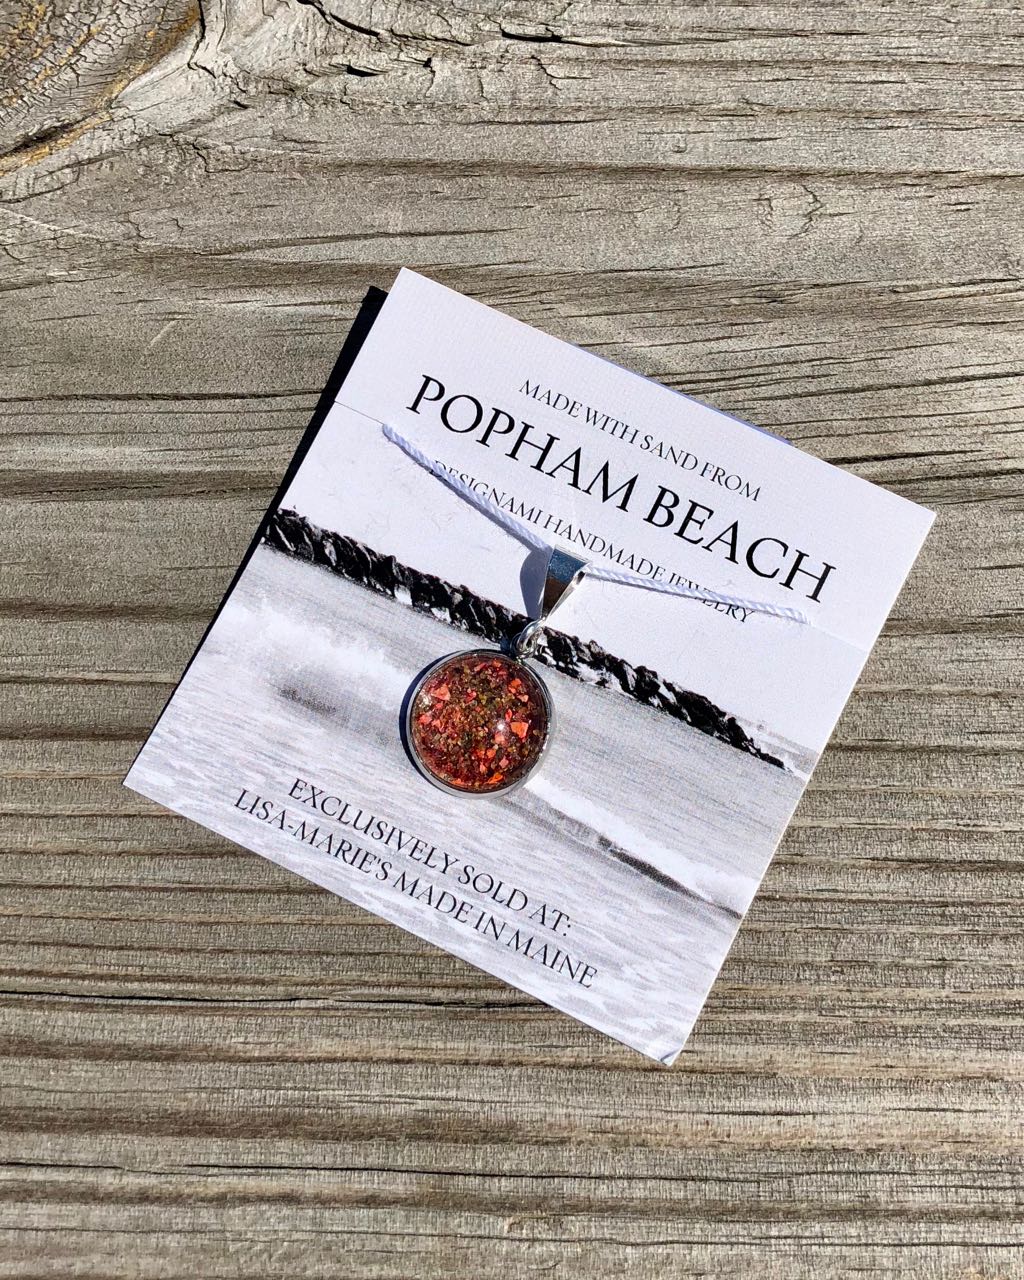 Popham Beach Sand with Lobster Shell Small Pendant, Popham Beach Sand with Lobster Shell Jewelry